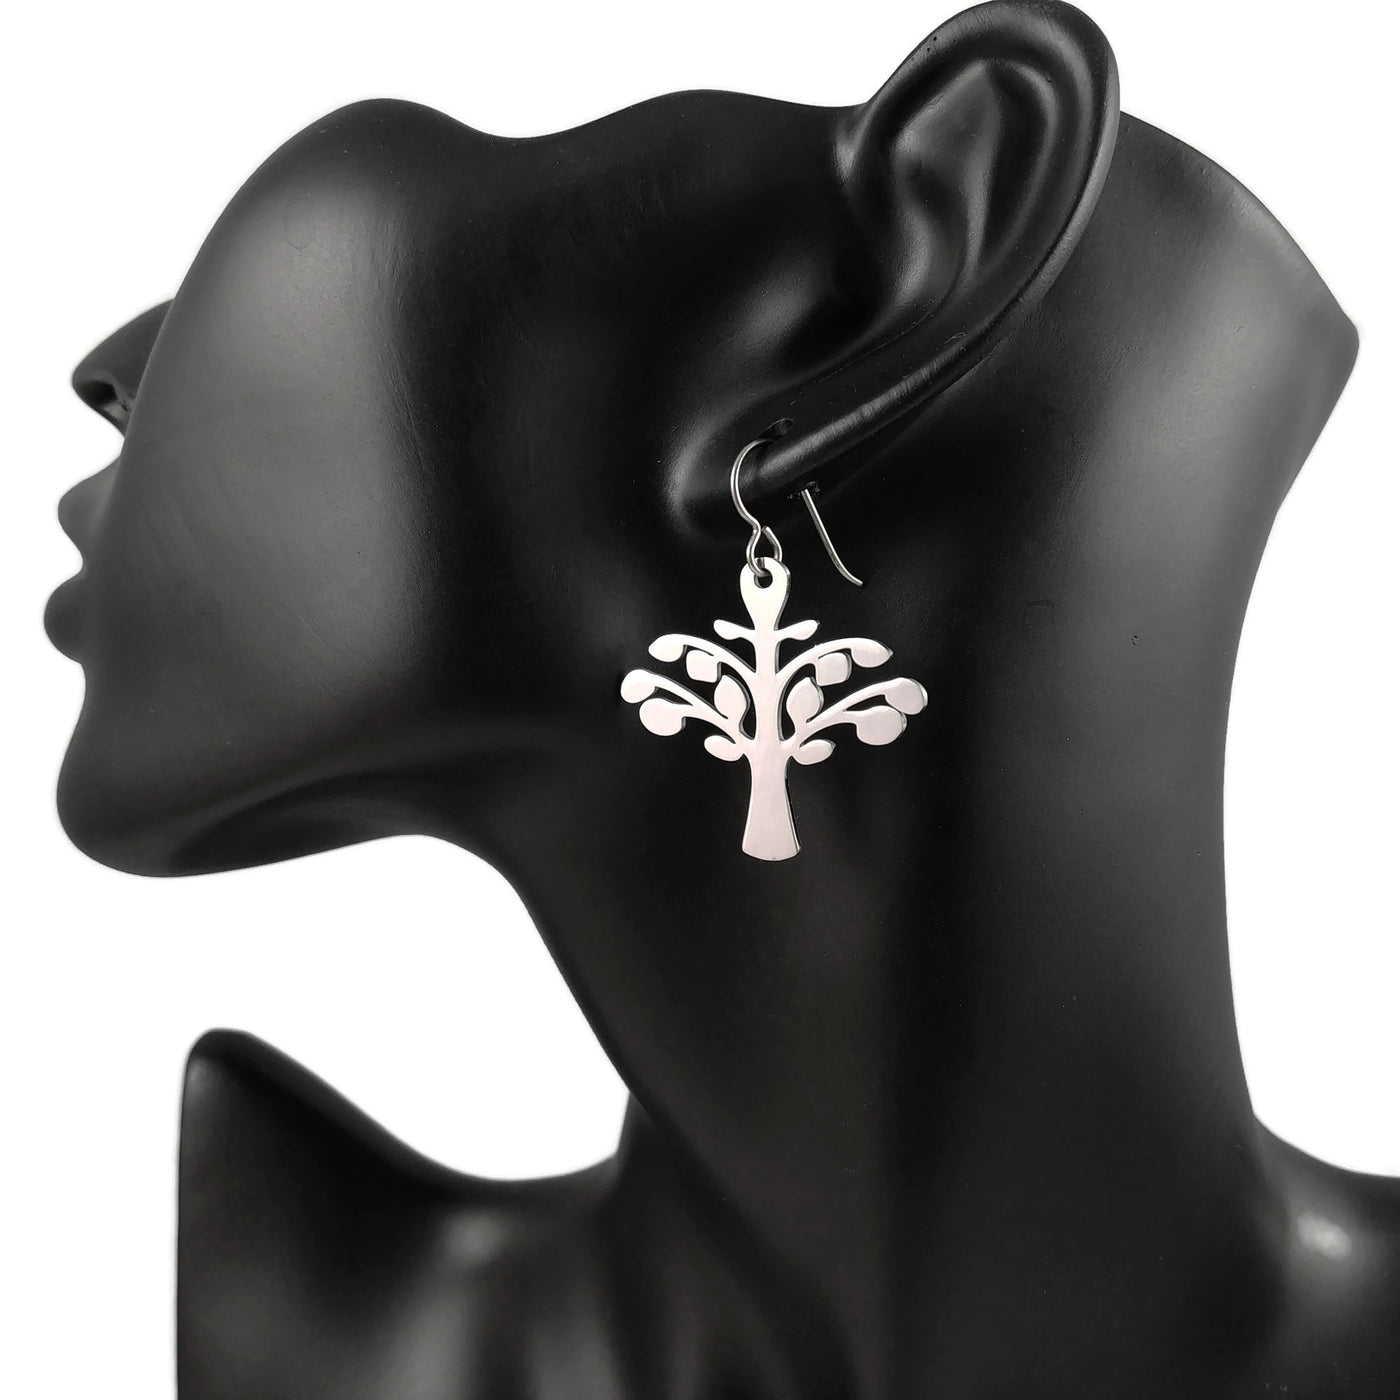 Silver tree dangle earrings - Hypoallergenic pure titanium and stainless steel